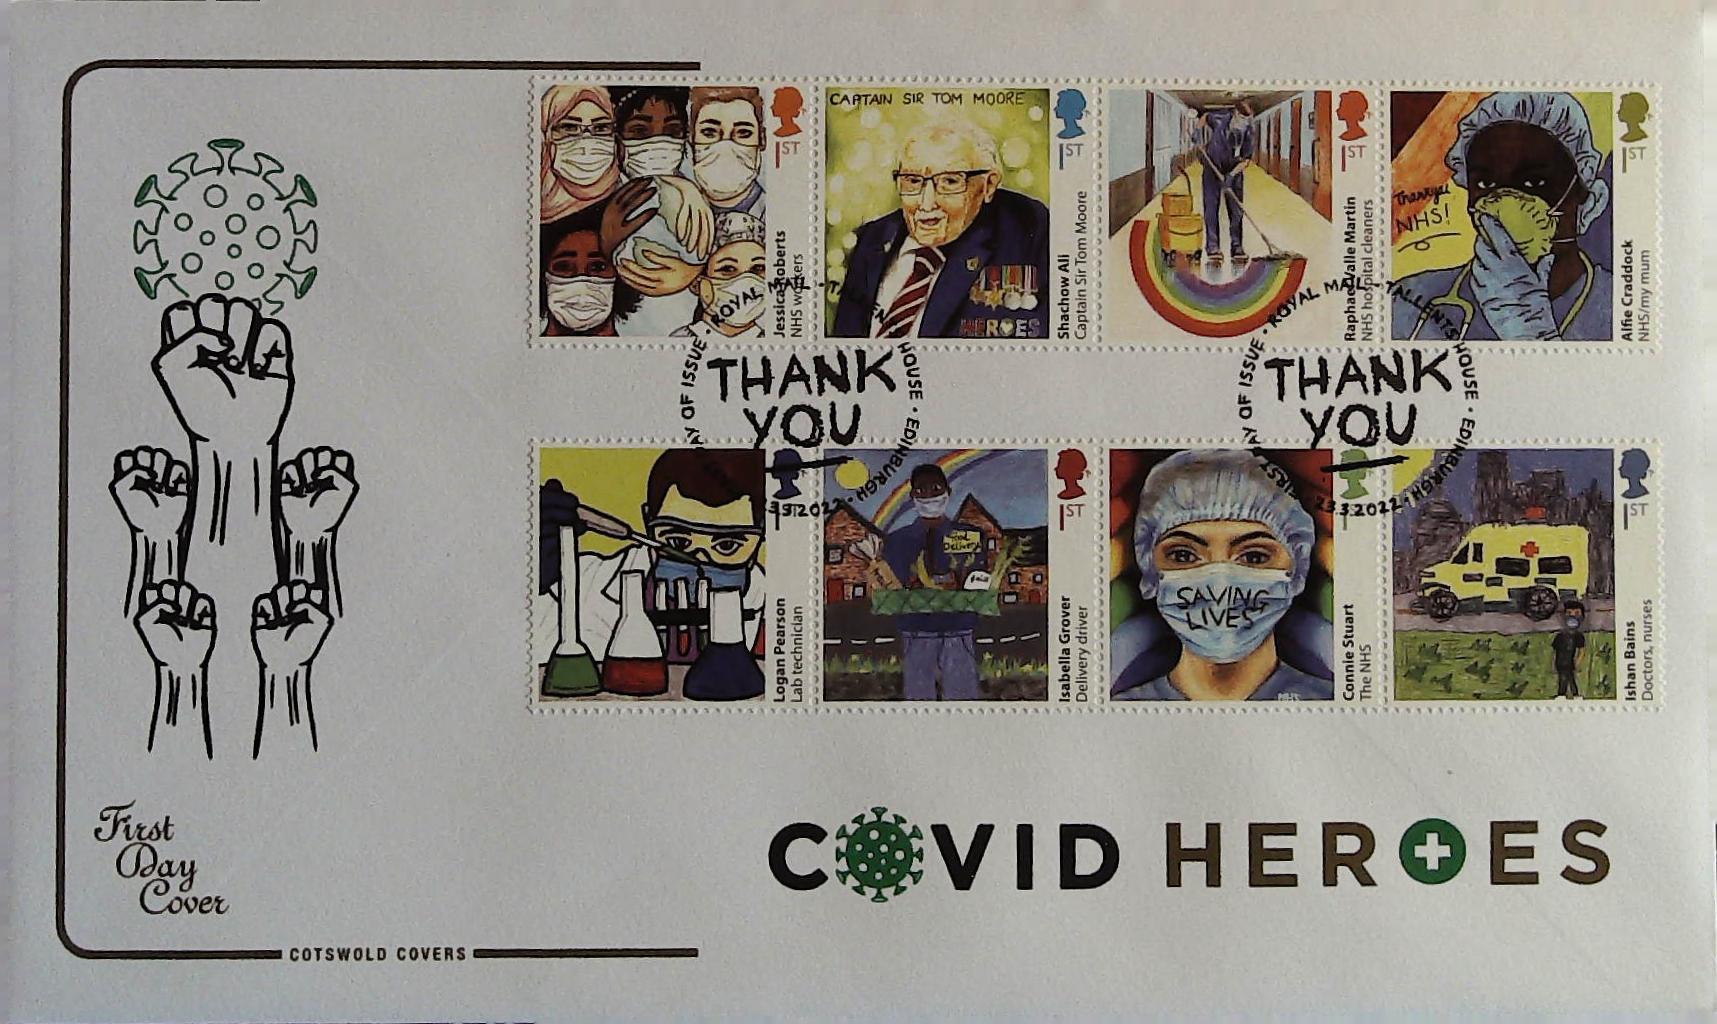 2022 COVID HEROES - COTSWOLD FDC -THANK YOU TALLENTS HOUSE EDINBURGH POSTMARK]